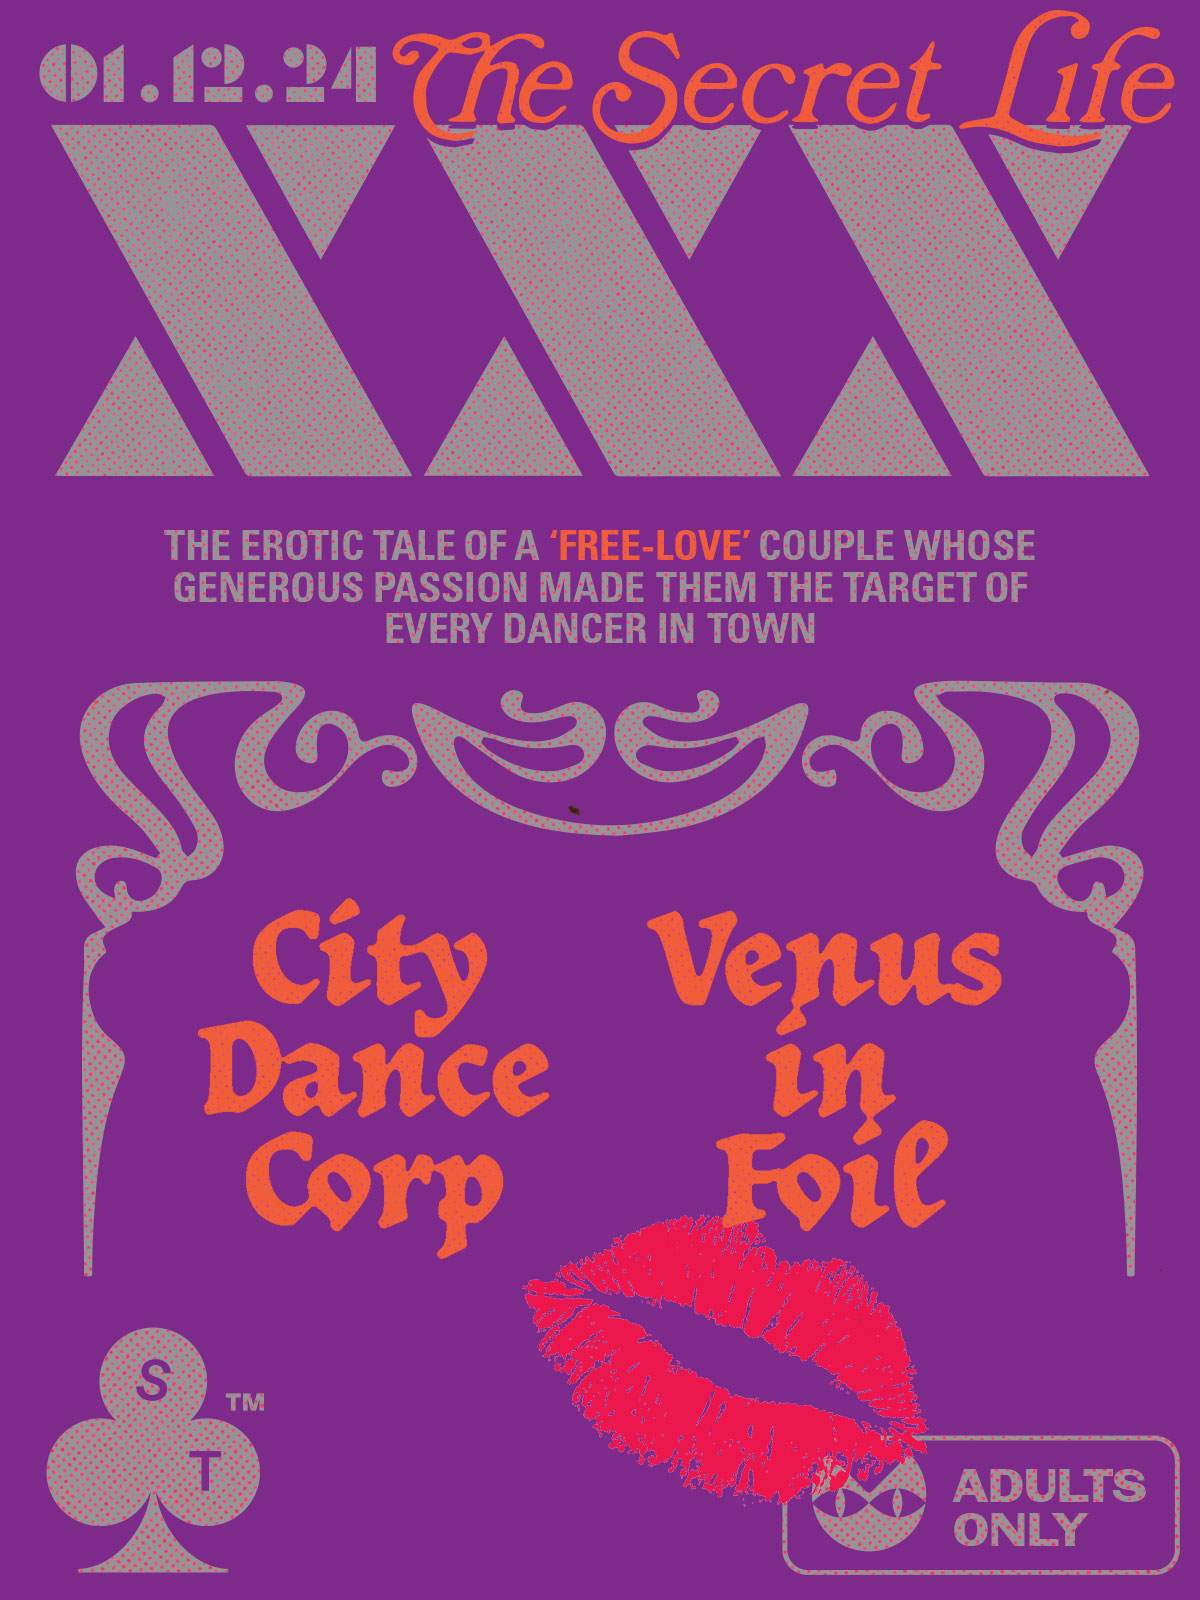 082: Club XXX - Venus in Foil and City Dance Corporation b2b all night long - フライヤー表